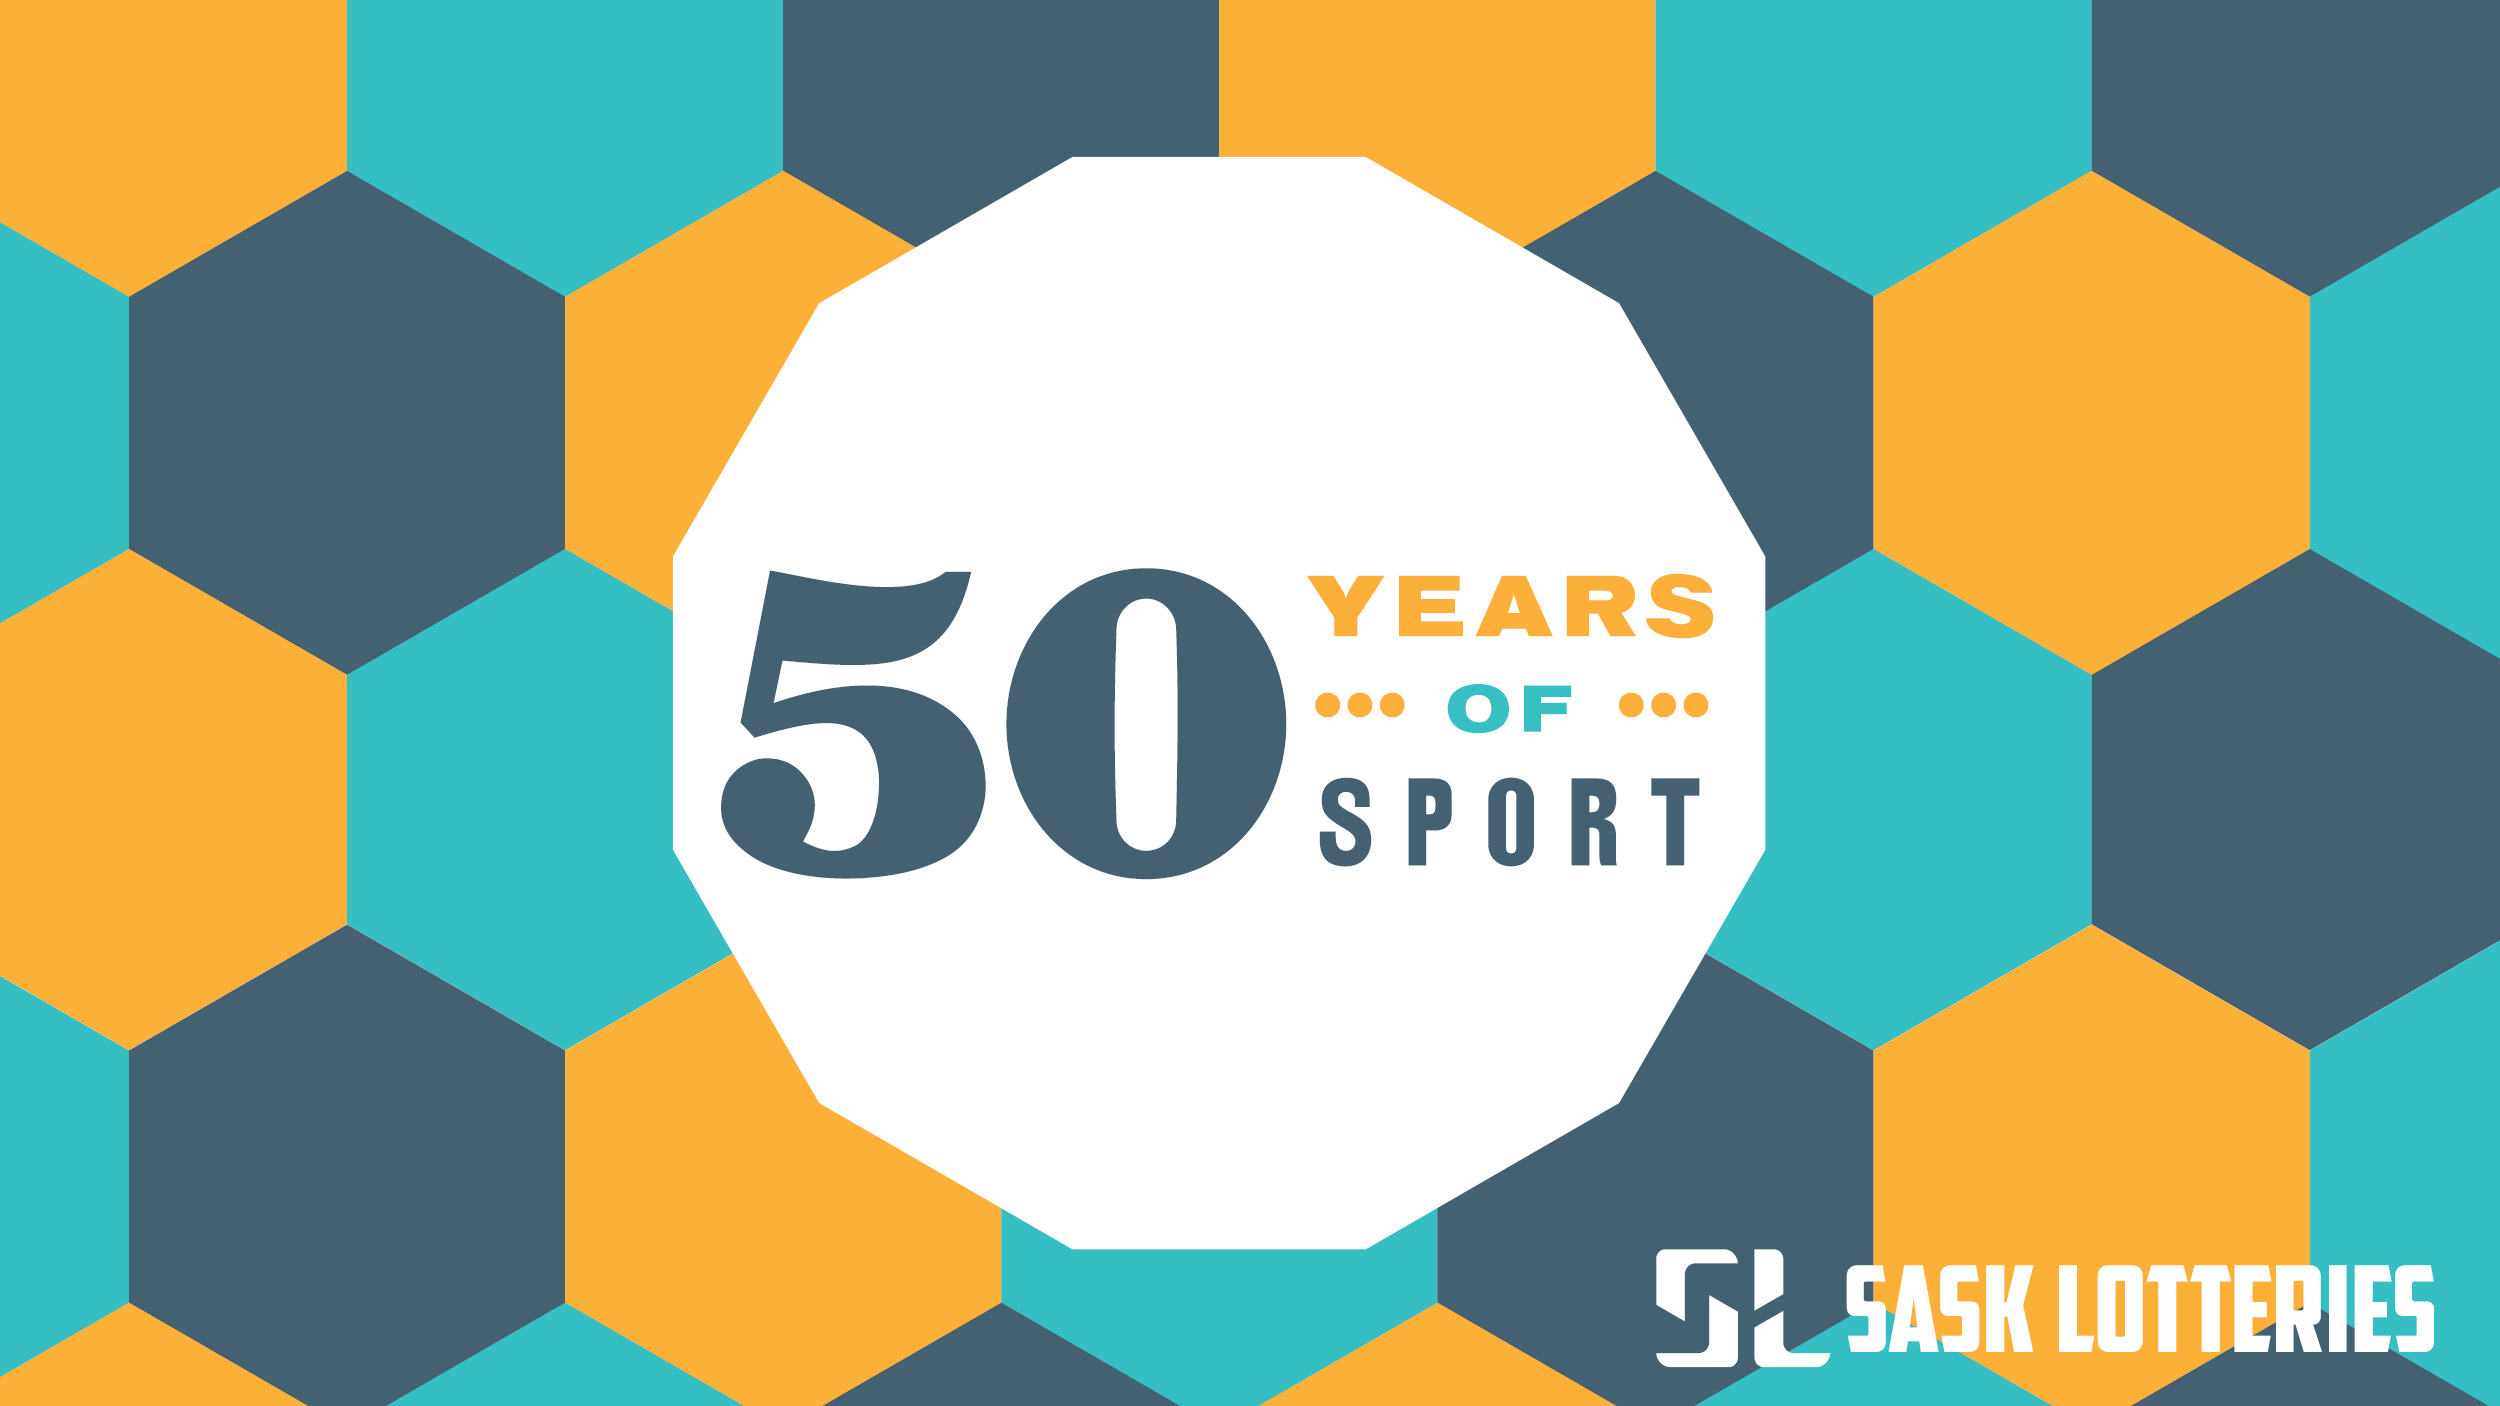 Sask Lotteries celebrates 50 years of supporting sport, culture and recreation